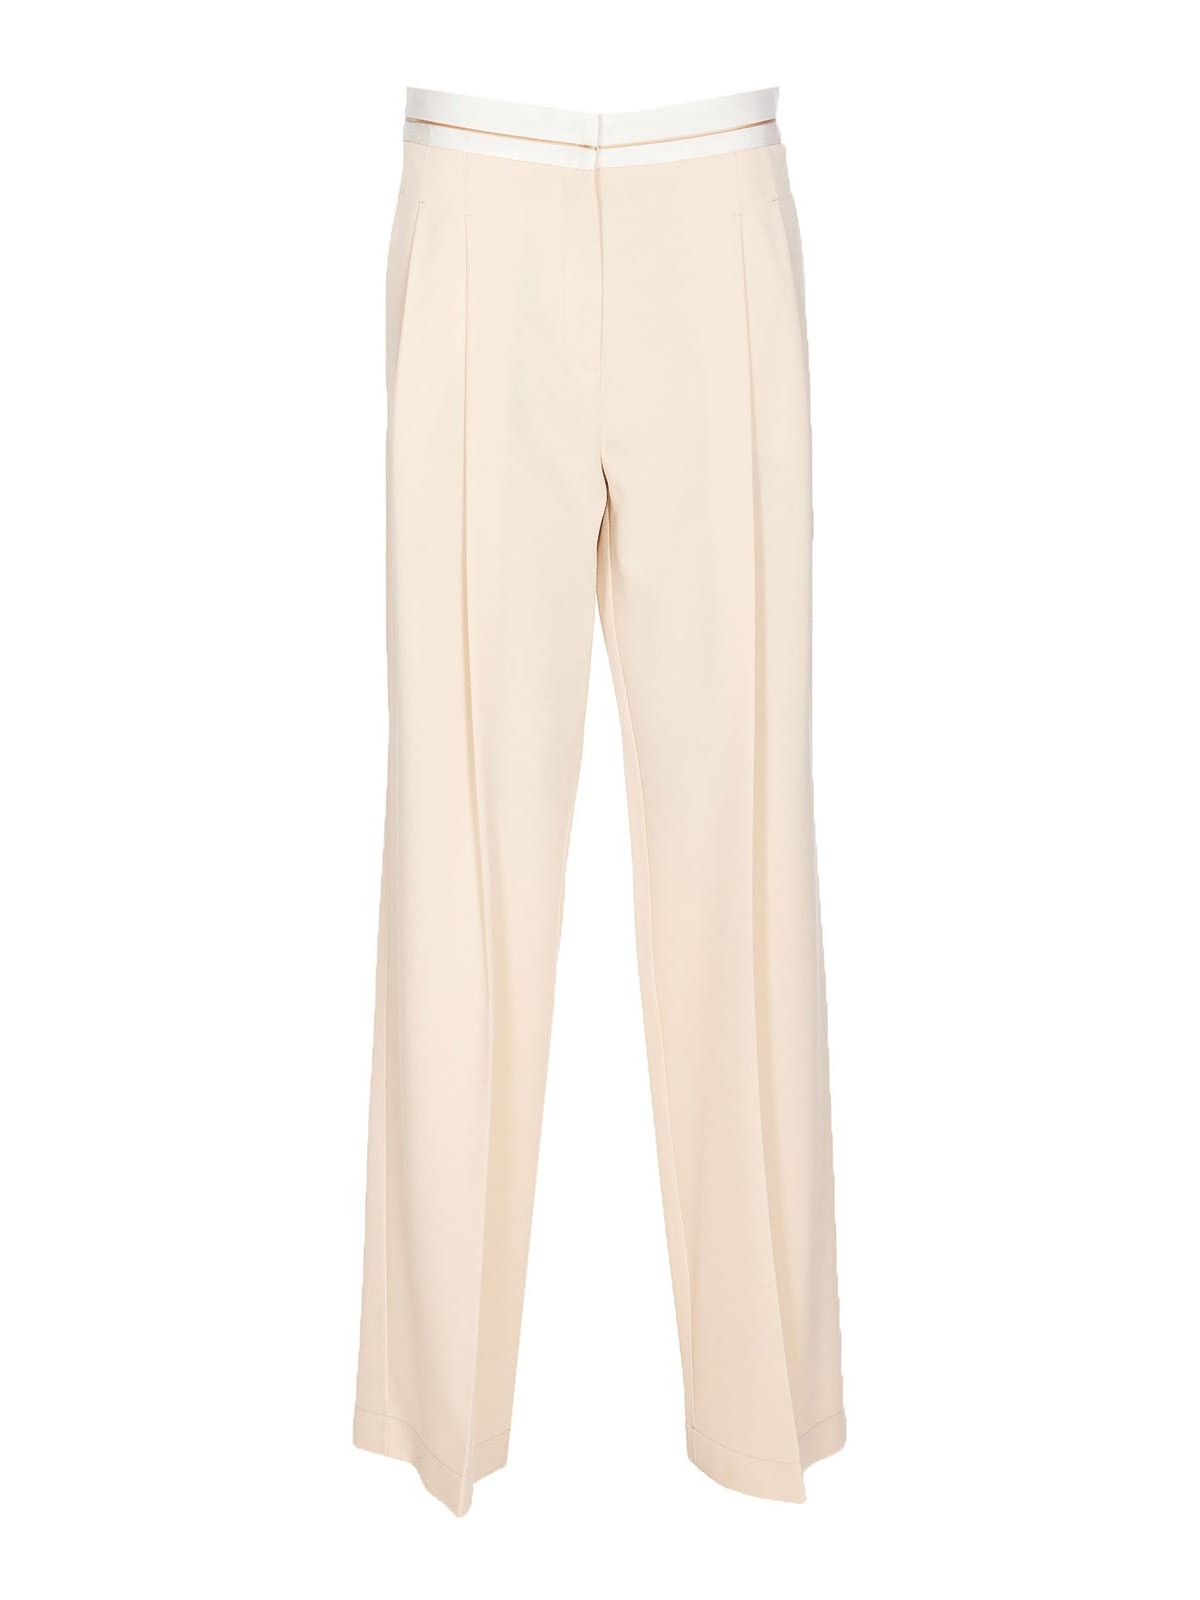 Patrizia Pepe Ivory Pants Zip And Hook Contrasting In White